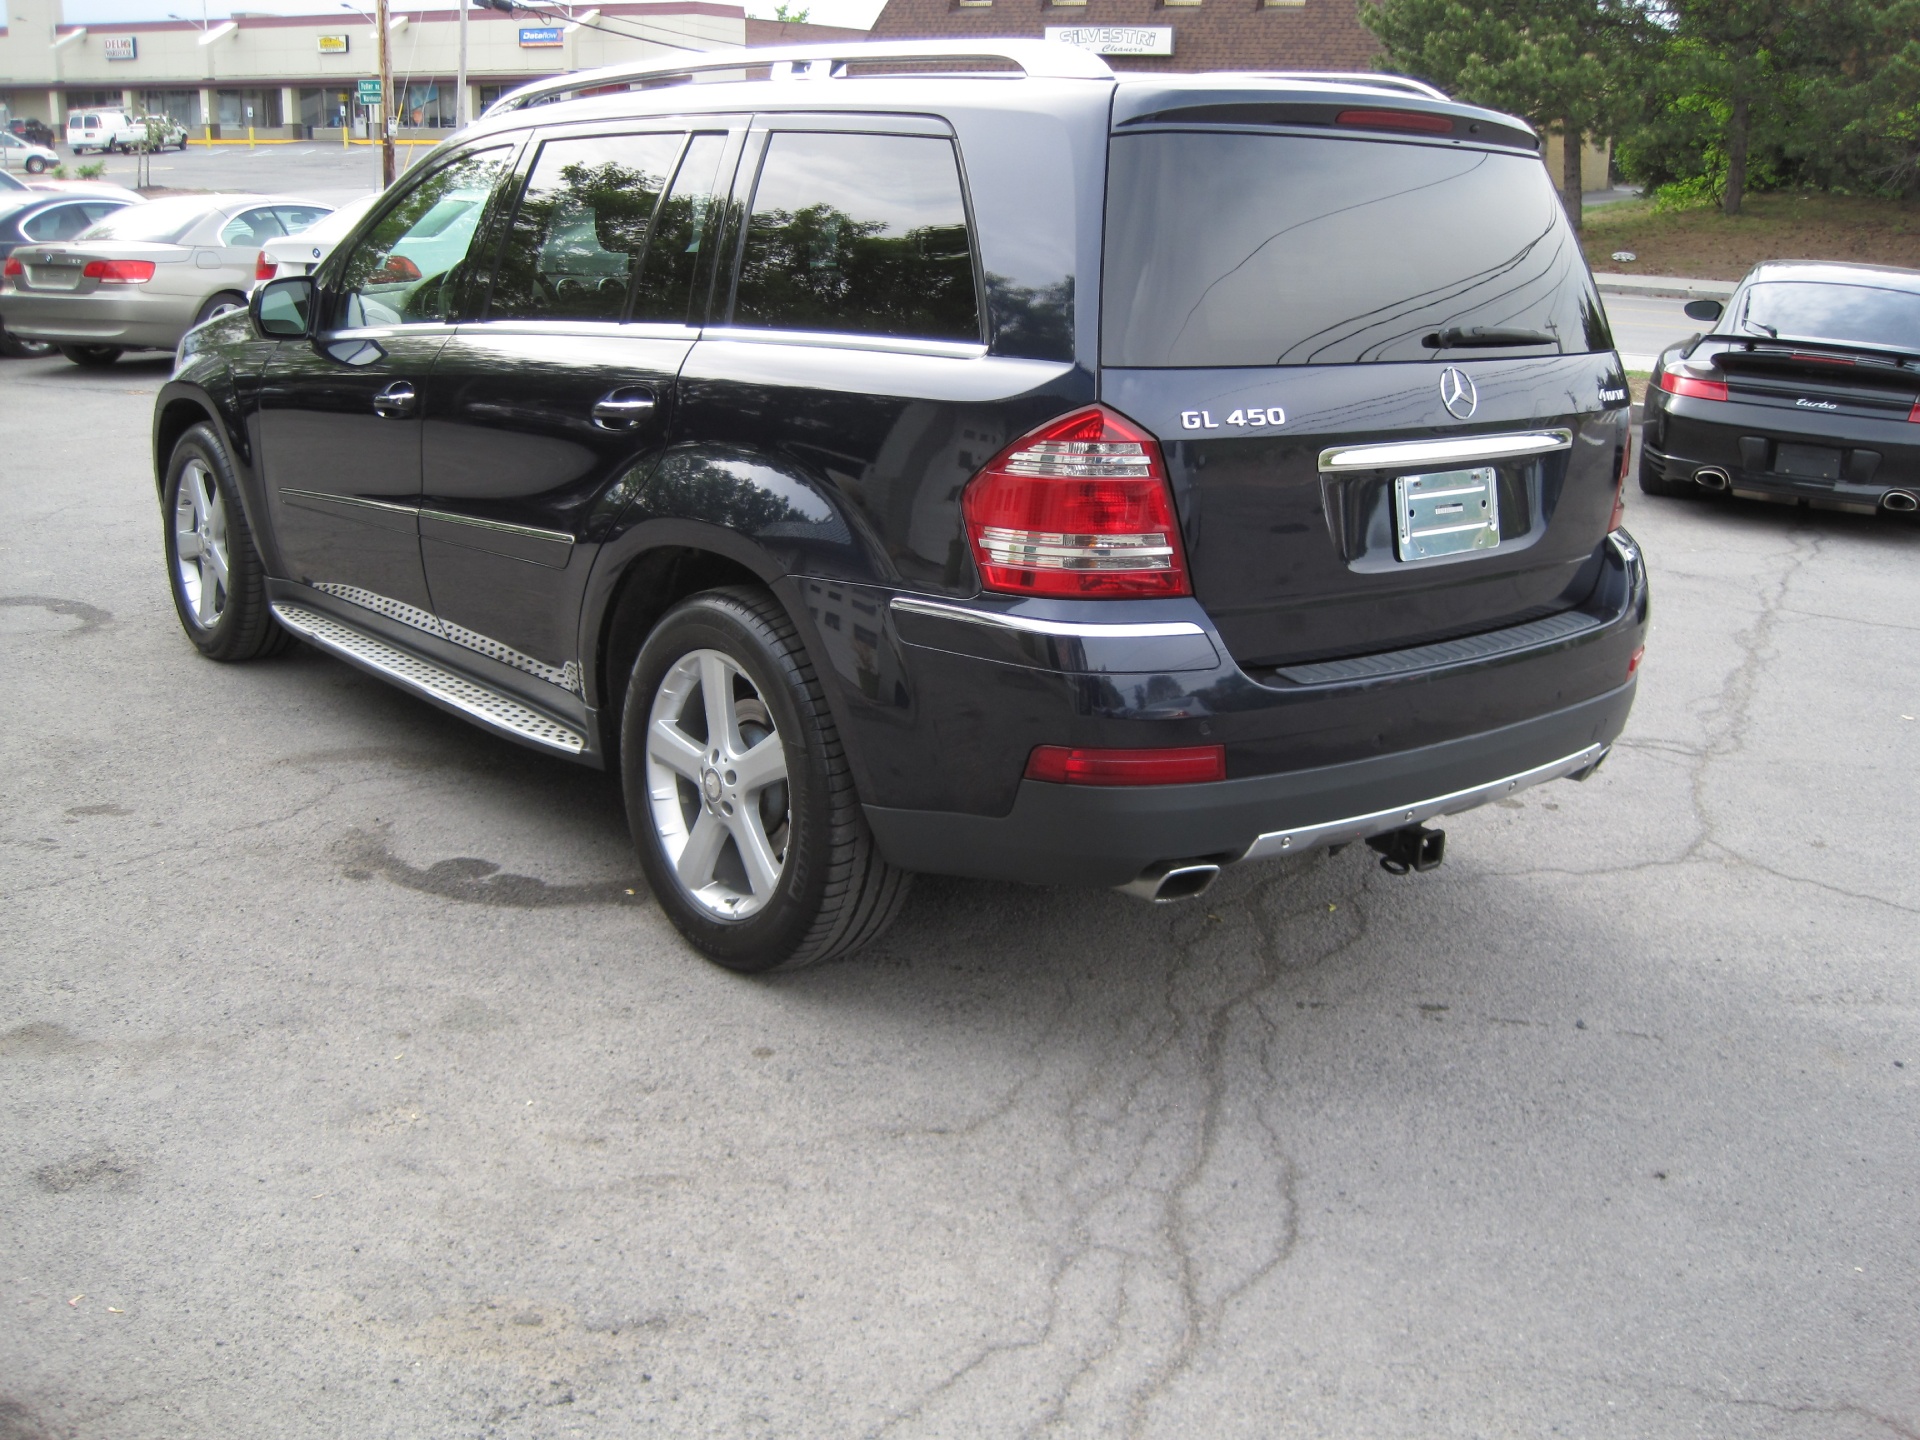 2009 Mercedes Benz Gl Class Gl450 4matic Awd Loaded Rear Tvs Entertainment Premium 02 Pkgs And More Stock 15072 For Sale Near Albany Ny Ny Mercedes Benz Dealer For Sale In Albany Ny 15072